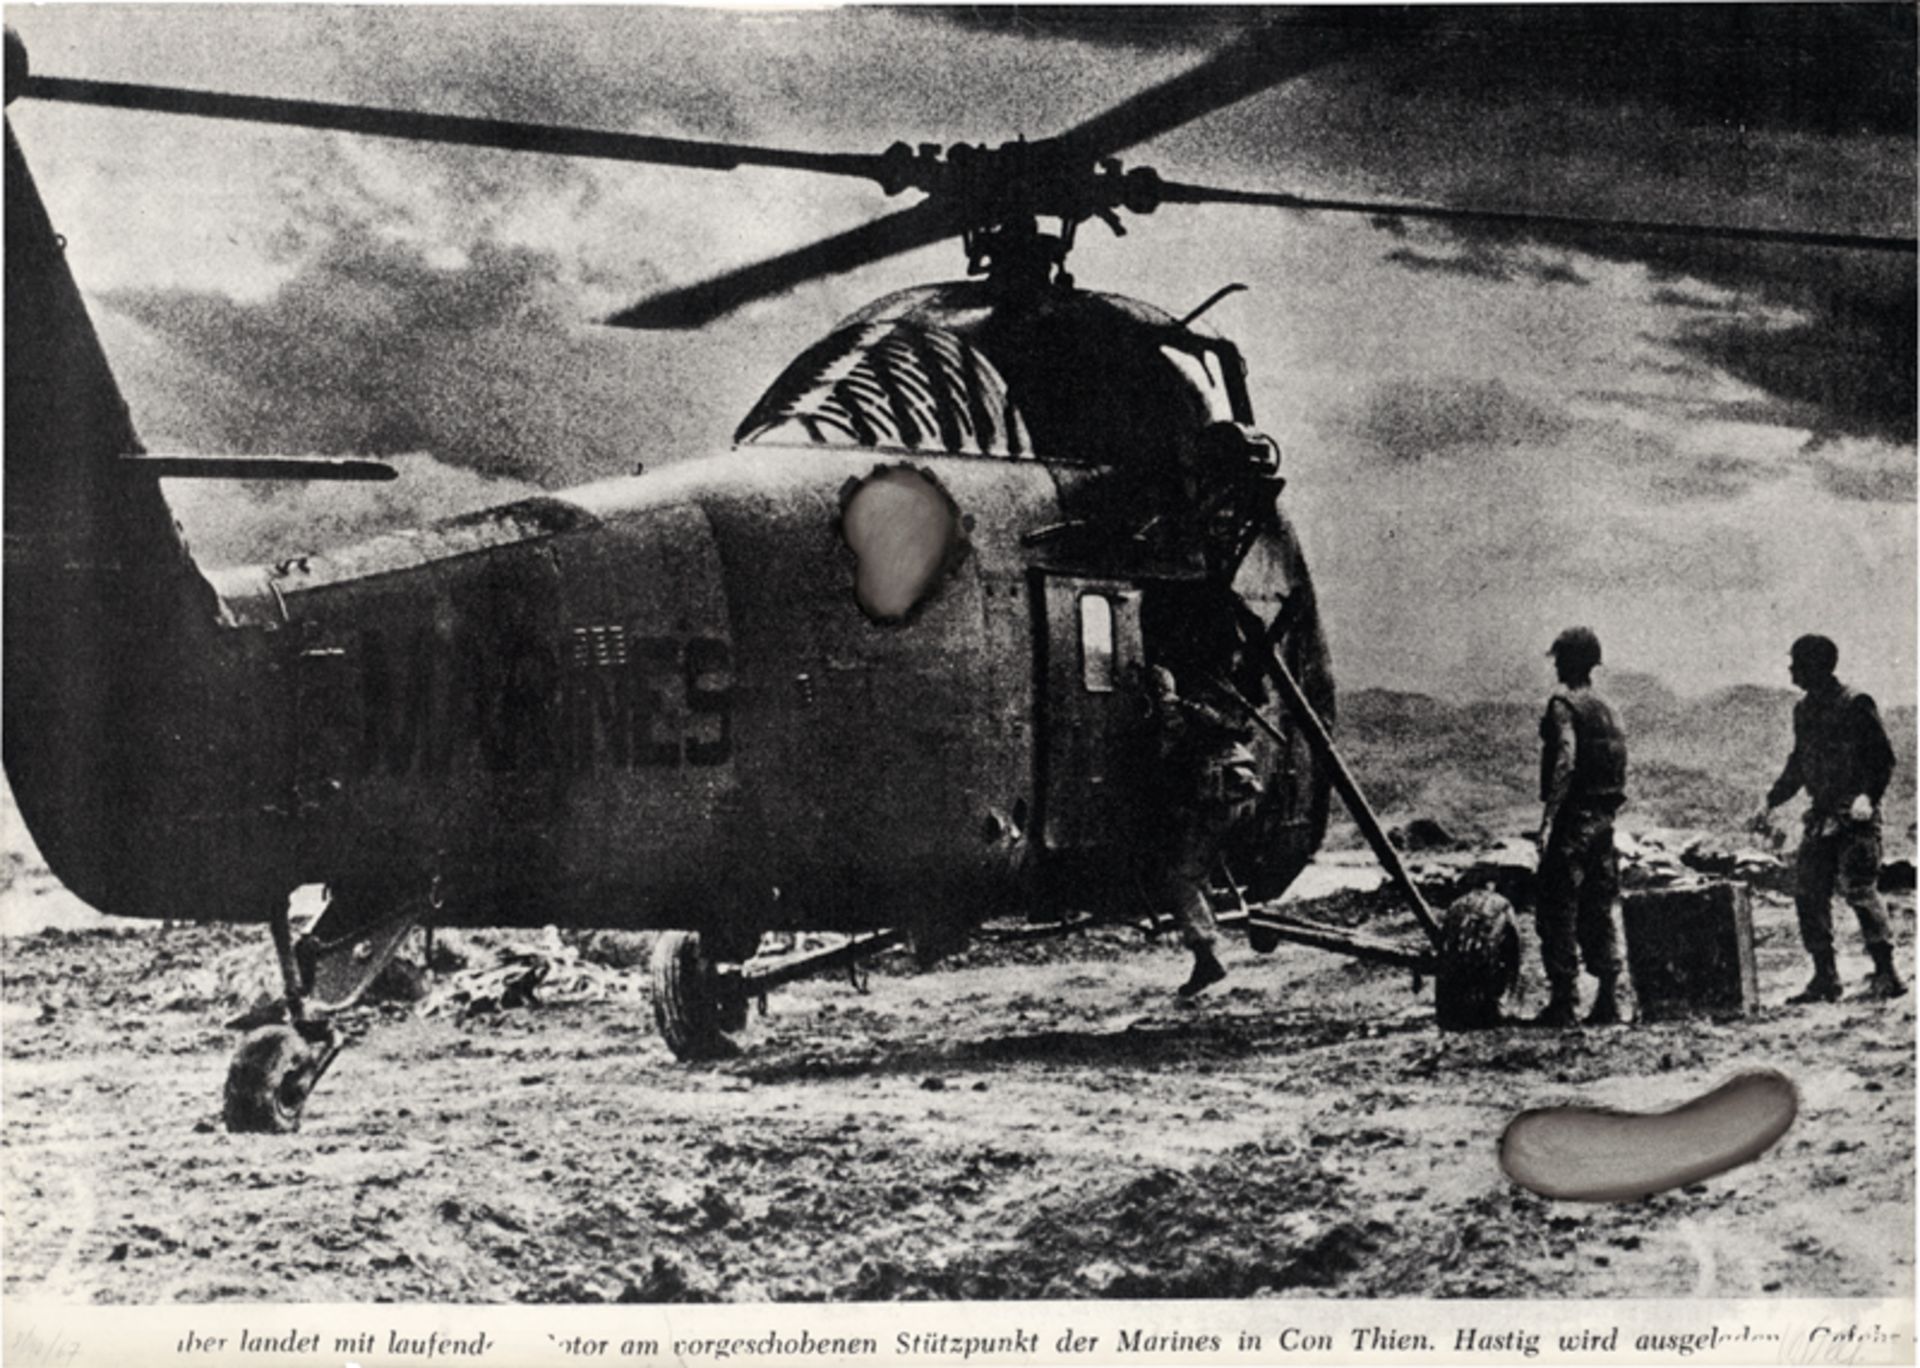 Vostell, Wolf: Helikopter